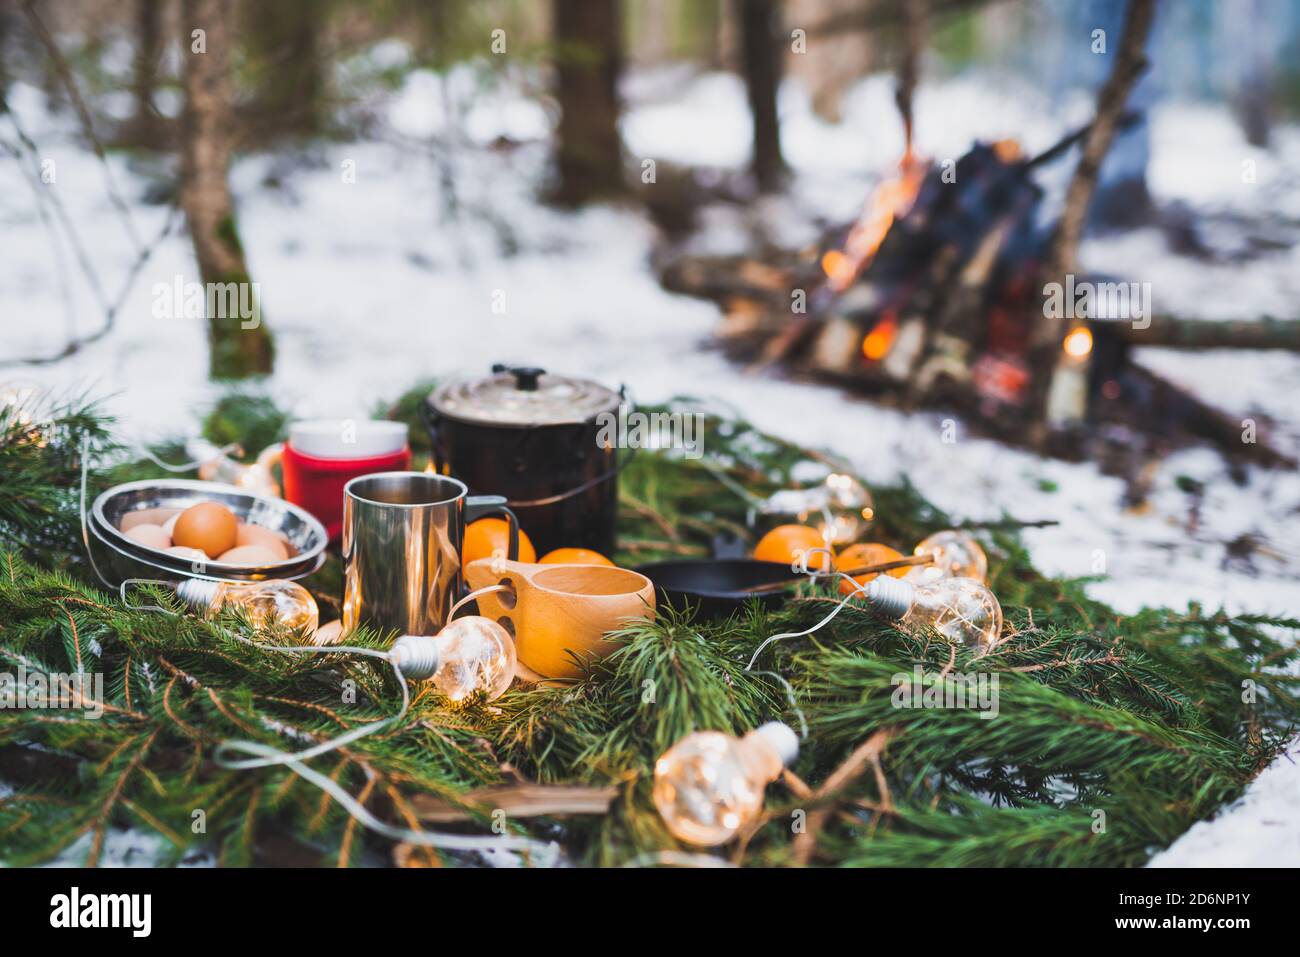 Winter picnic in the snow near by campfire with oranges and tea. Christmas garlands on fir branches Stock Photo